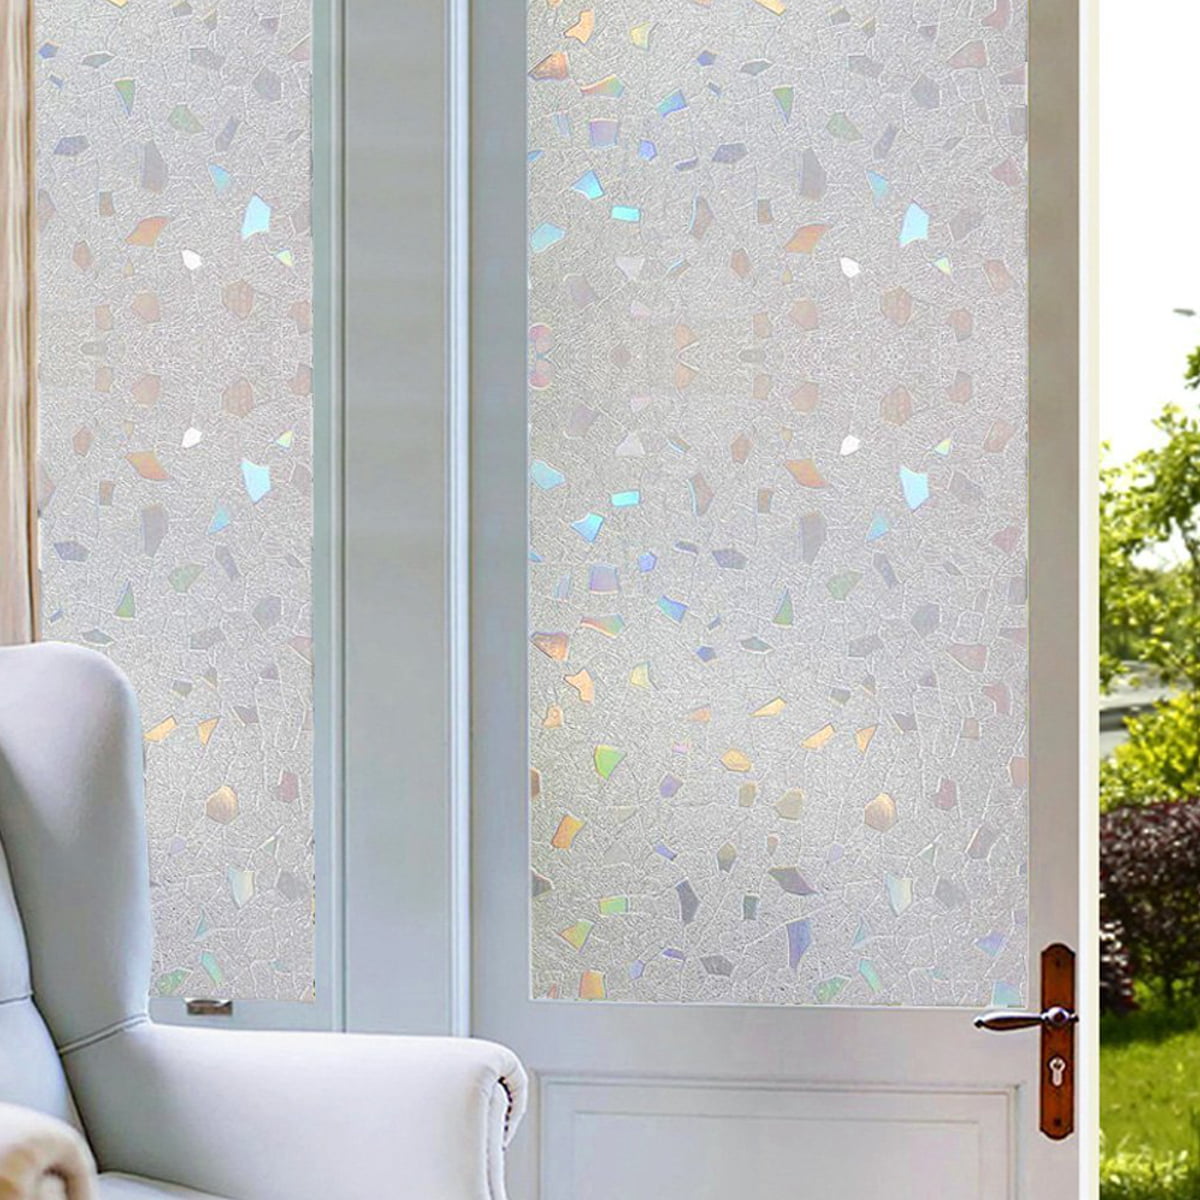 Privacy Window Glass Film Sticker Static Cling 3D Frosted Stained Bathroom Home 